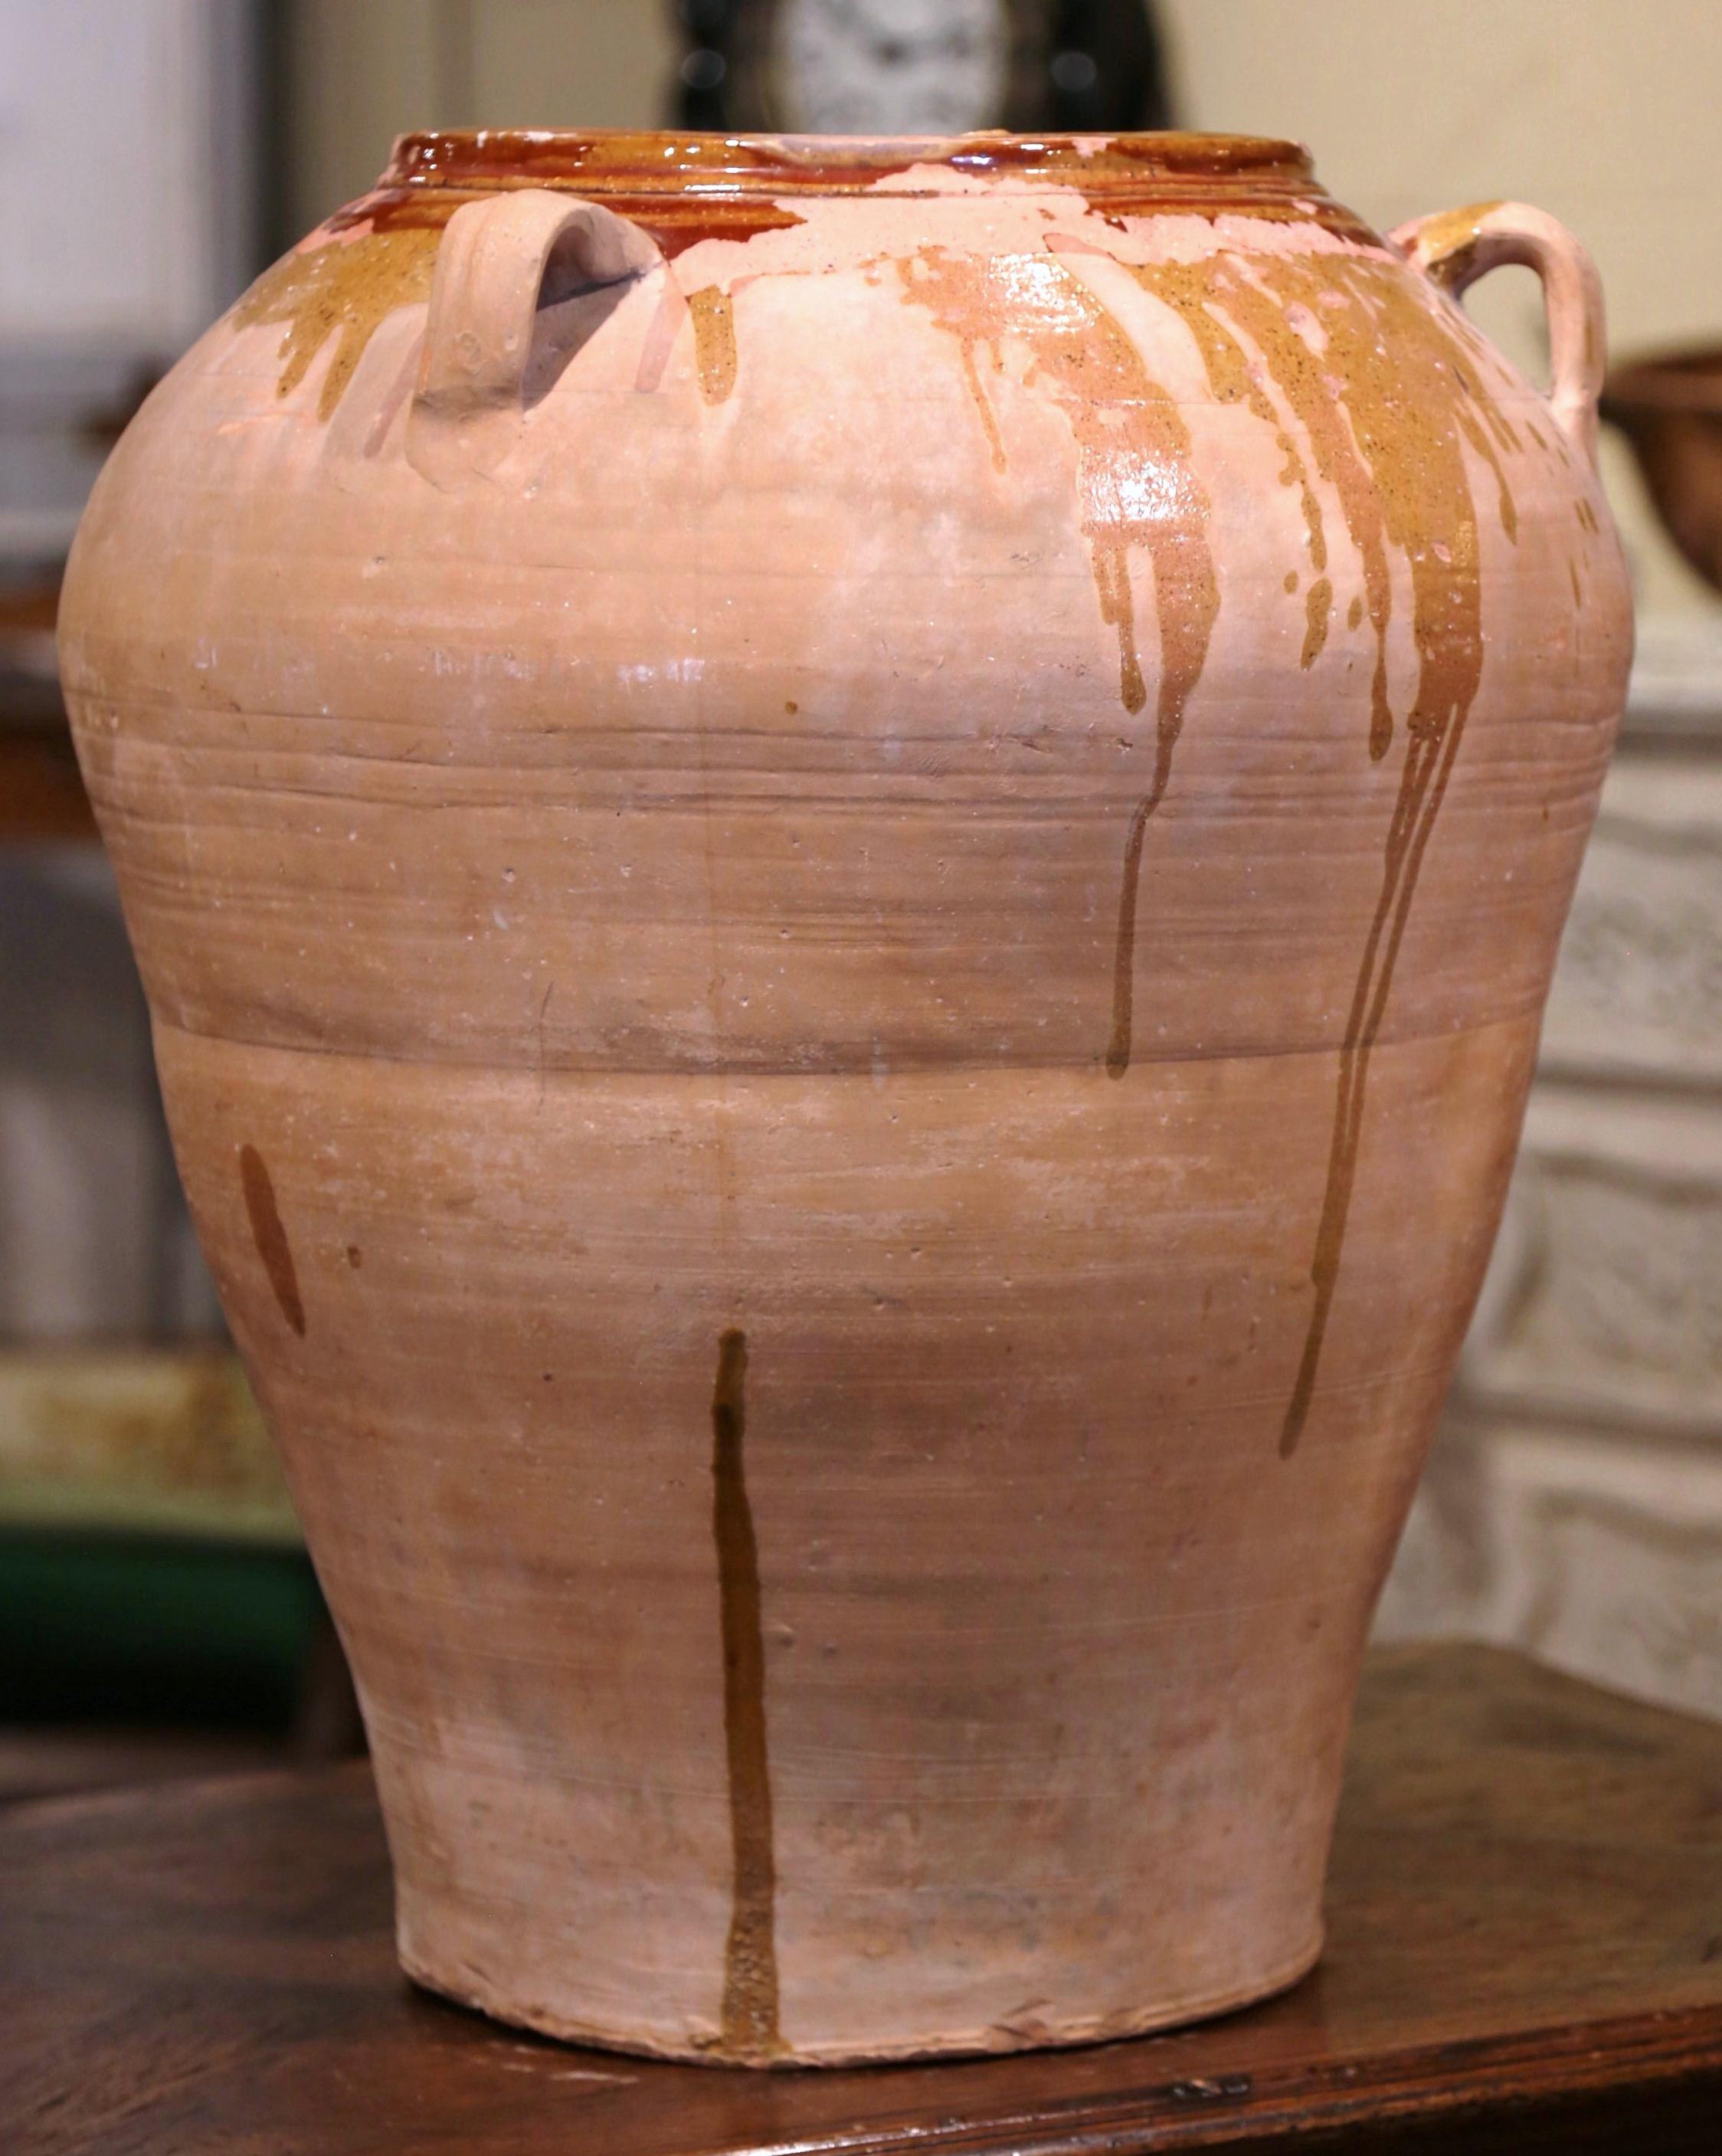 This large, antique earthenware jar was created in Southern France, circa 1870. Made of blond clay, the terracotta pot is round in shape with a tapered base and features three handles at the top; the olive jar is embellished with a brown beige glaze